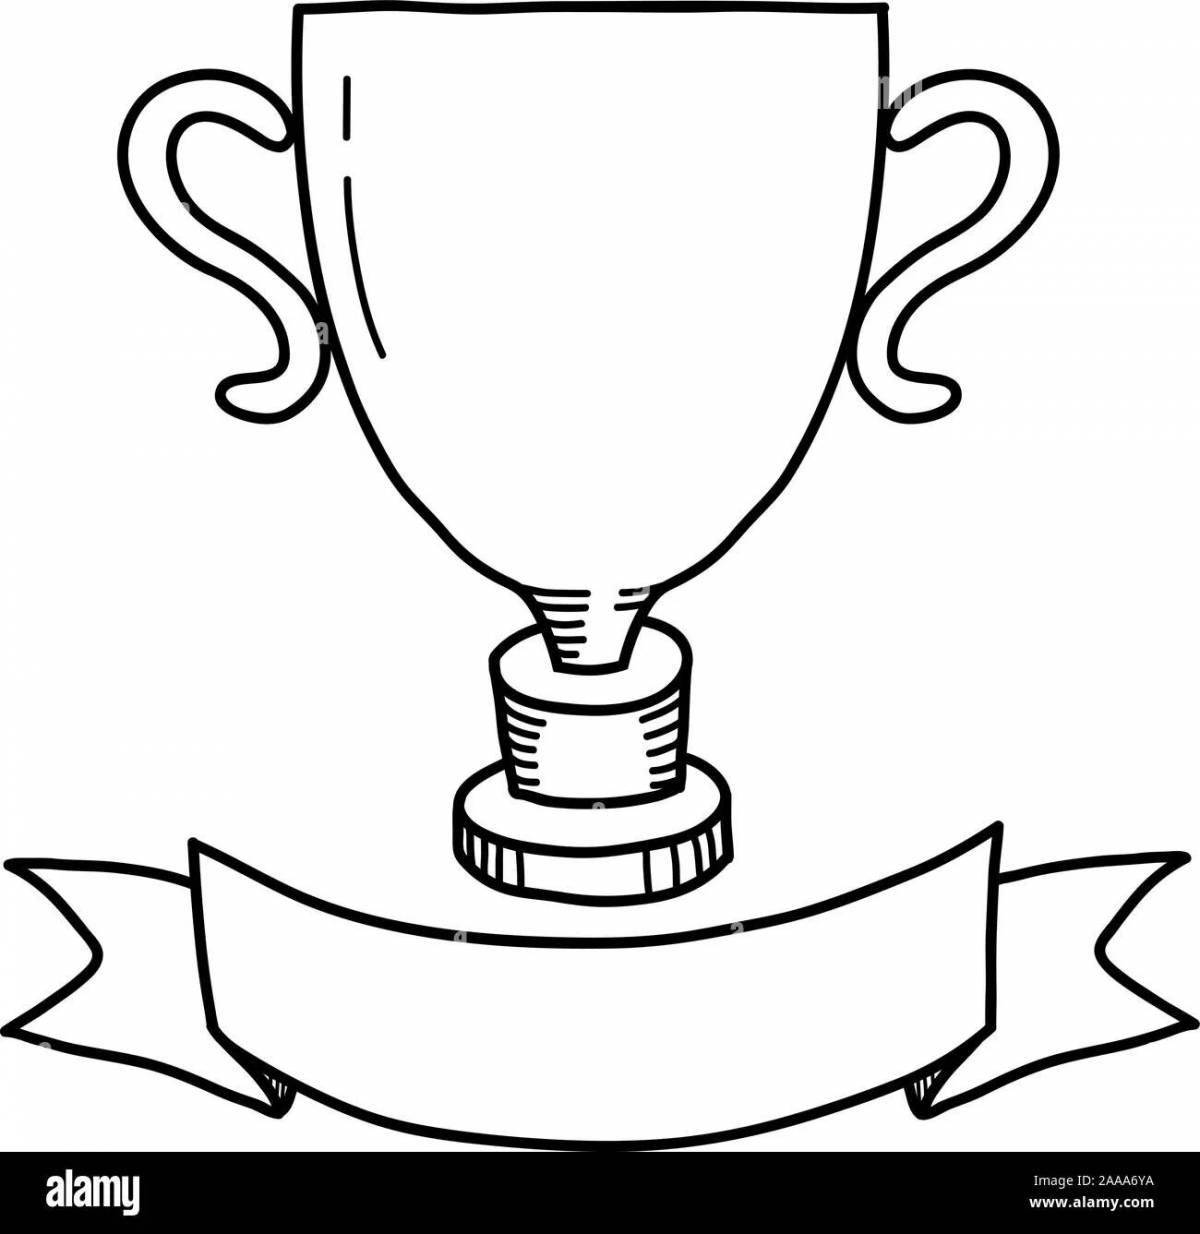 Jovial cup coloring book for kids